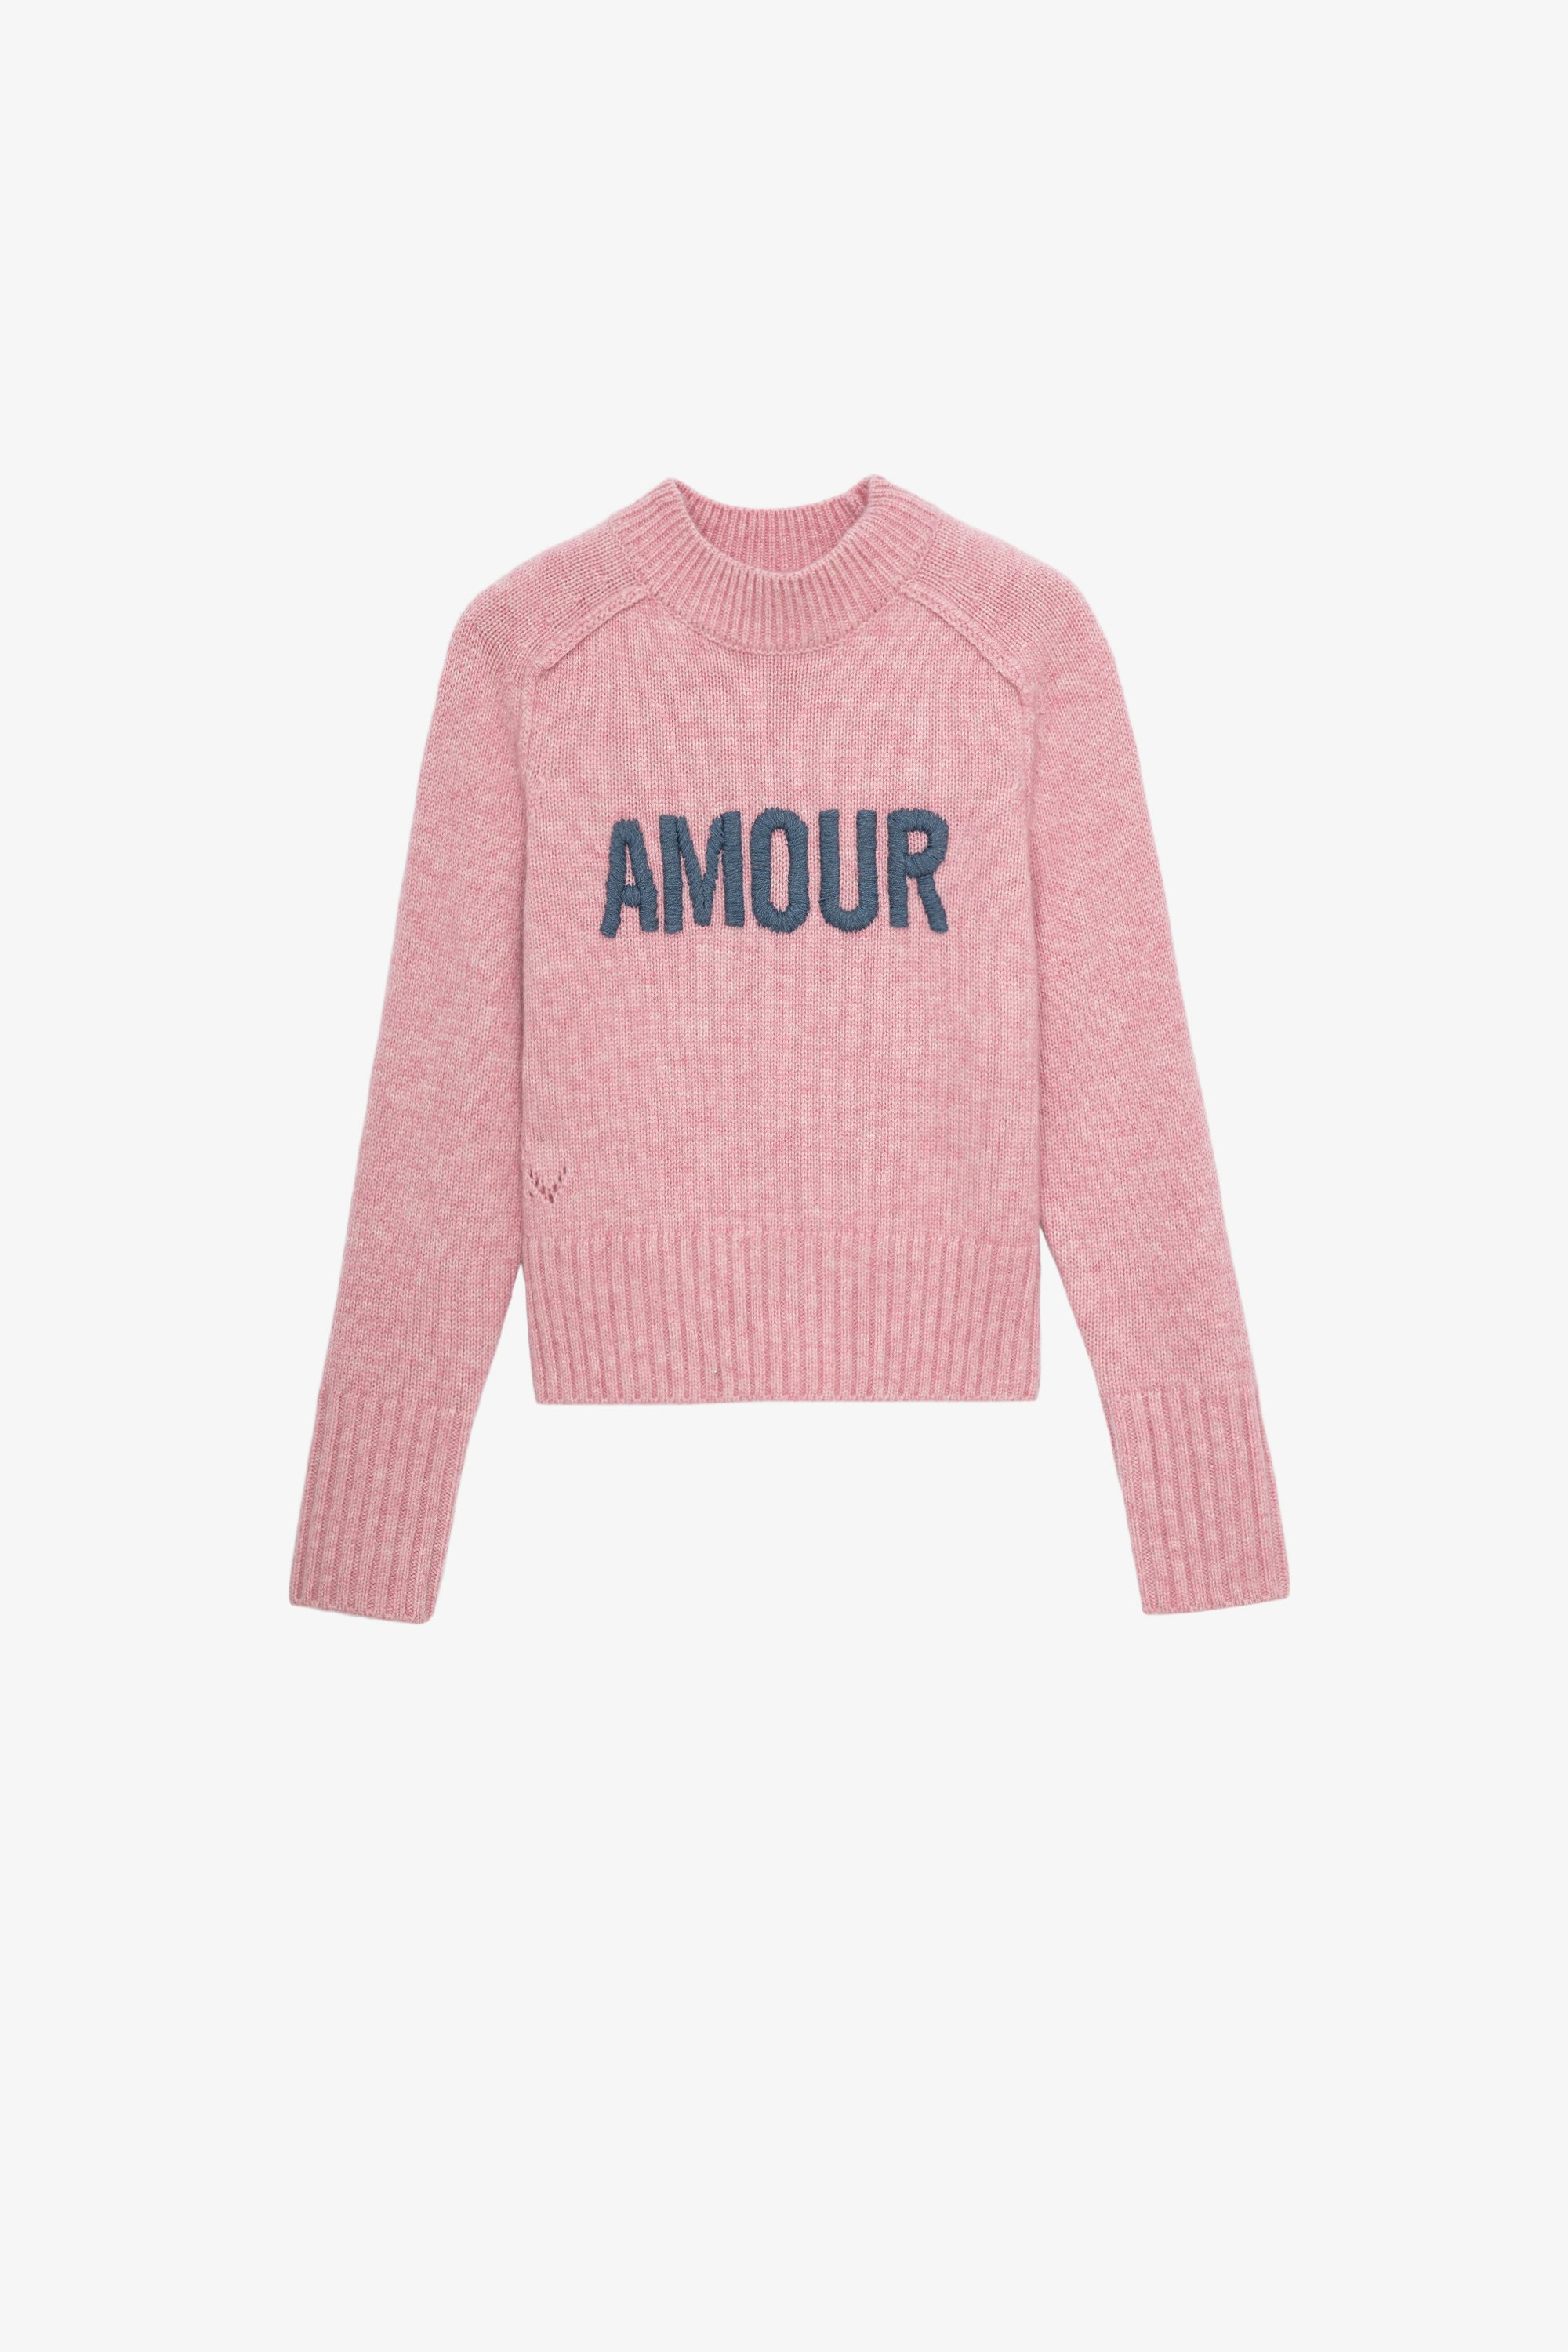 Milan Children’s Jumper Children’s pink long-sleeve knitted jumper with contrasting “Love” message 